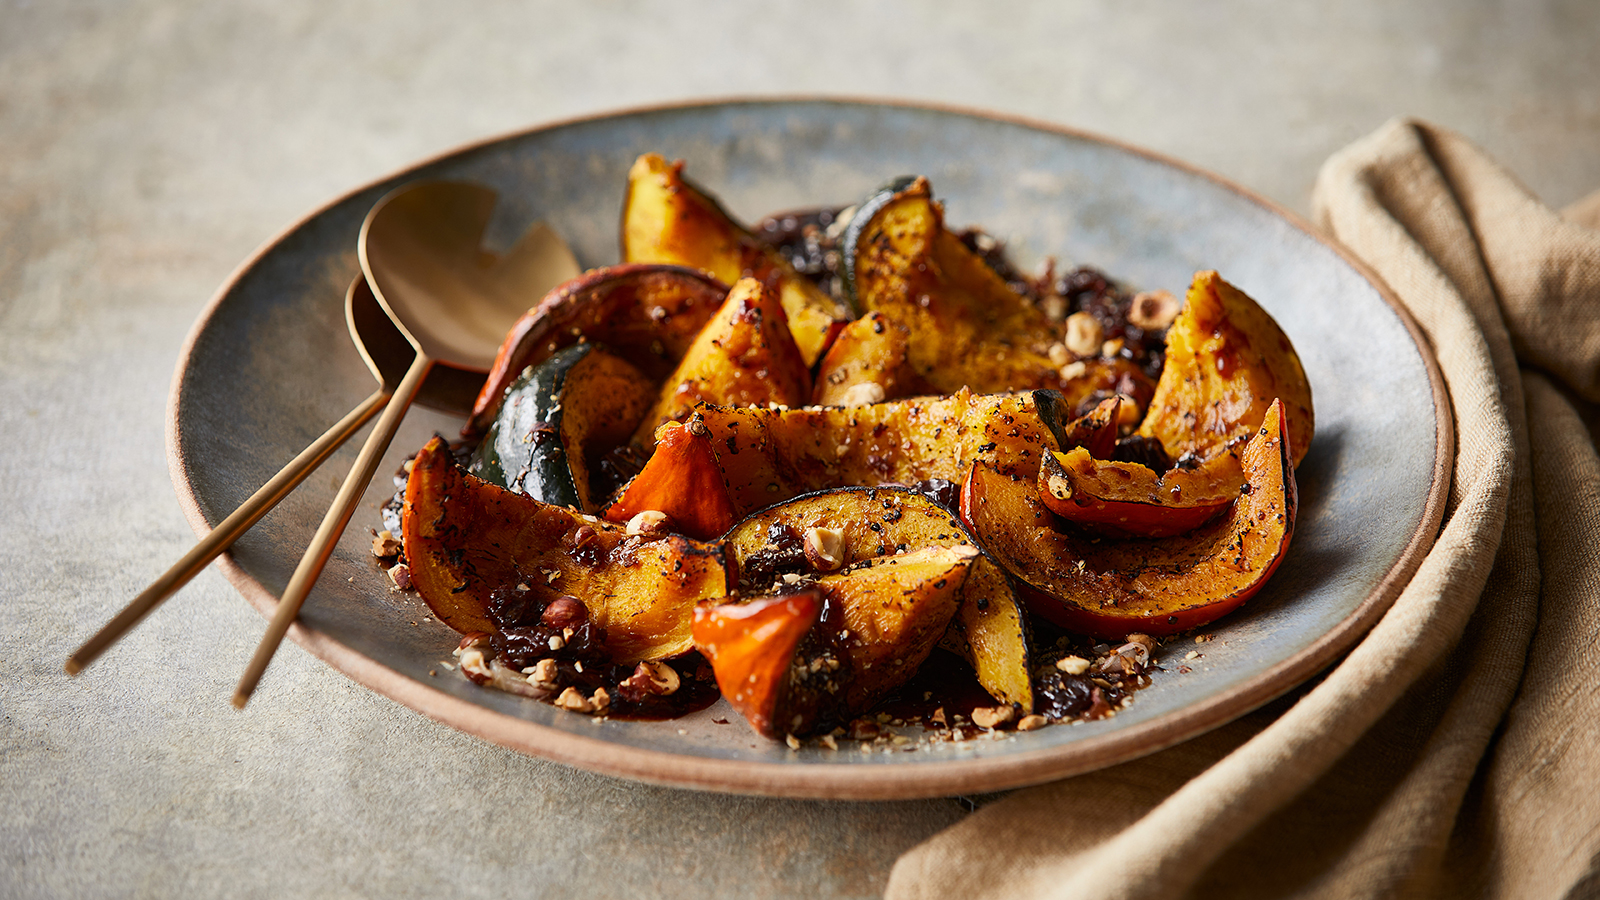 Roasted Fall Squash with Cherry Balsamic Agrodolce and Hazelnuts